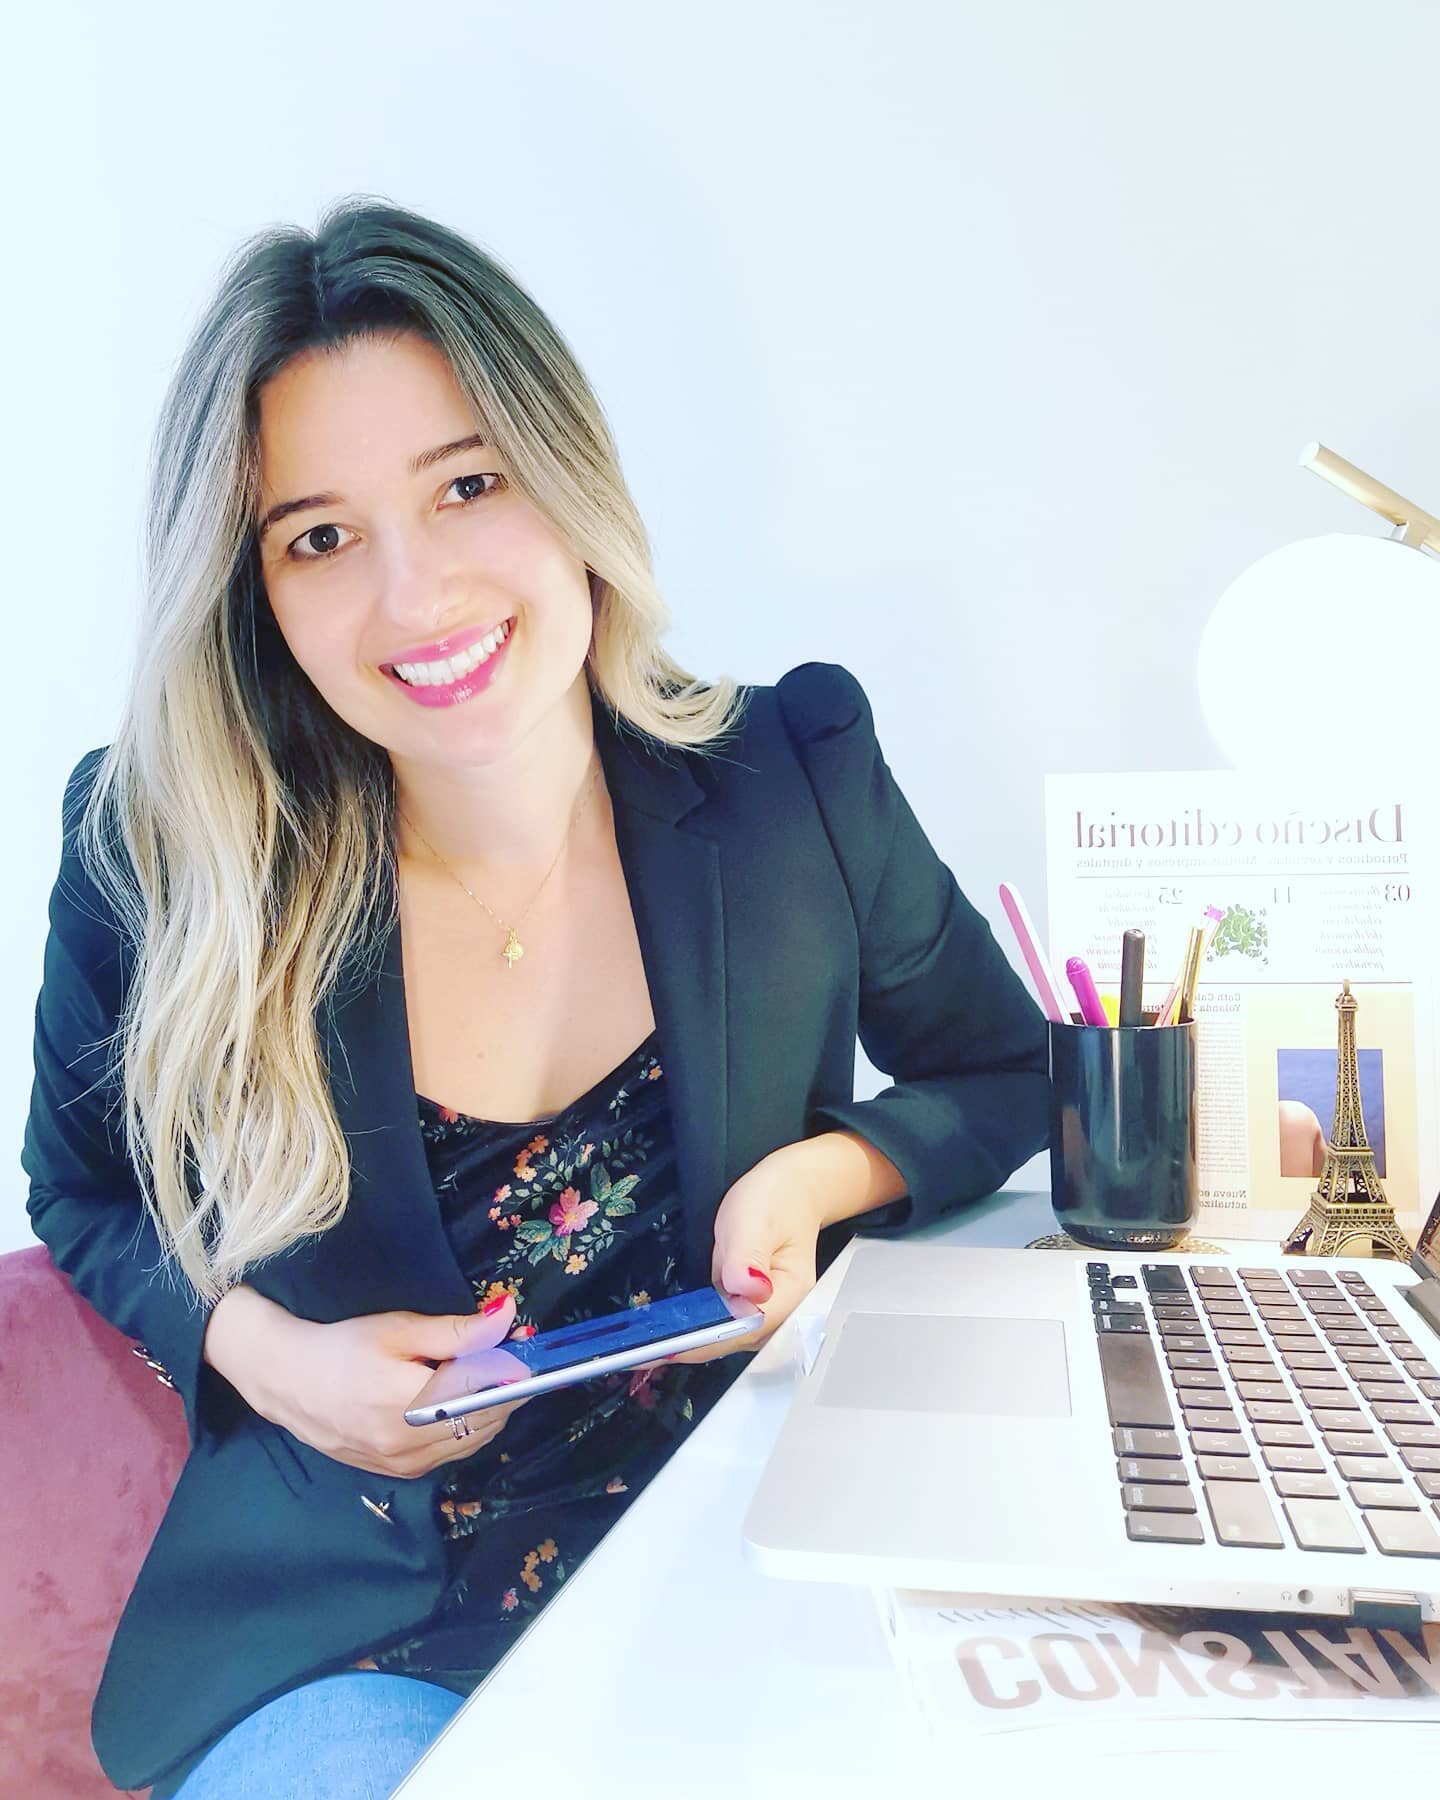 Hello, 

I am Amanda Garcia, focused on Creative Design and Art Direction for select brands, I provide elegant and clean design solutions for online and offline communication channels.

Over the last 10 years, I have worked with brands of the fashion